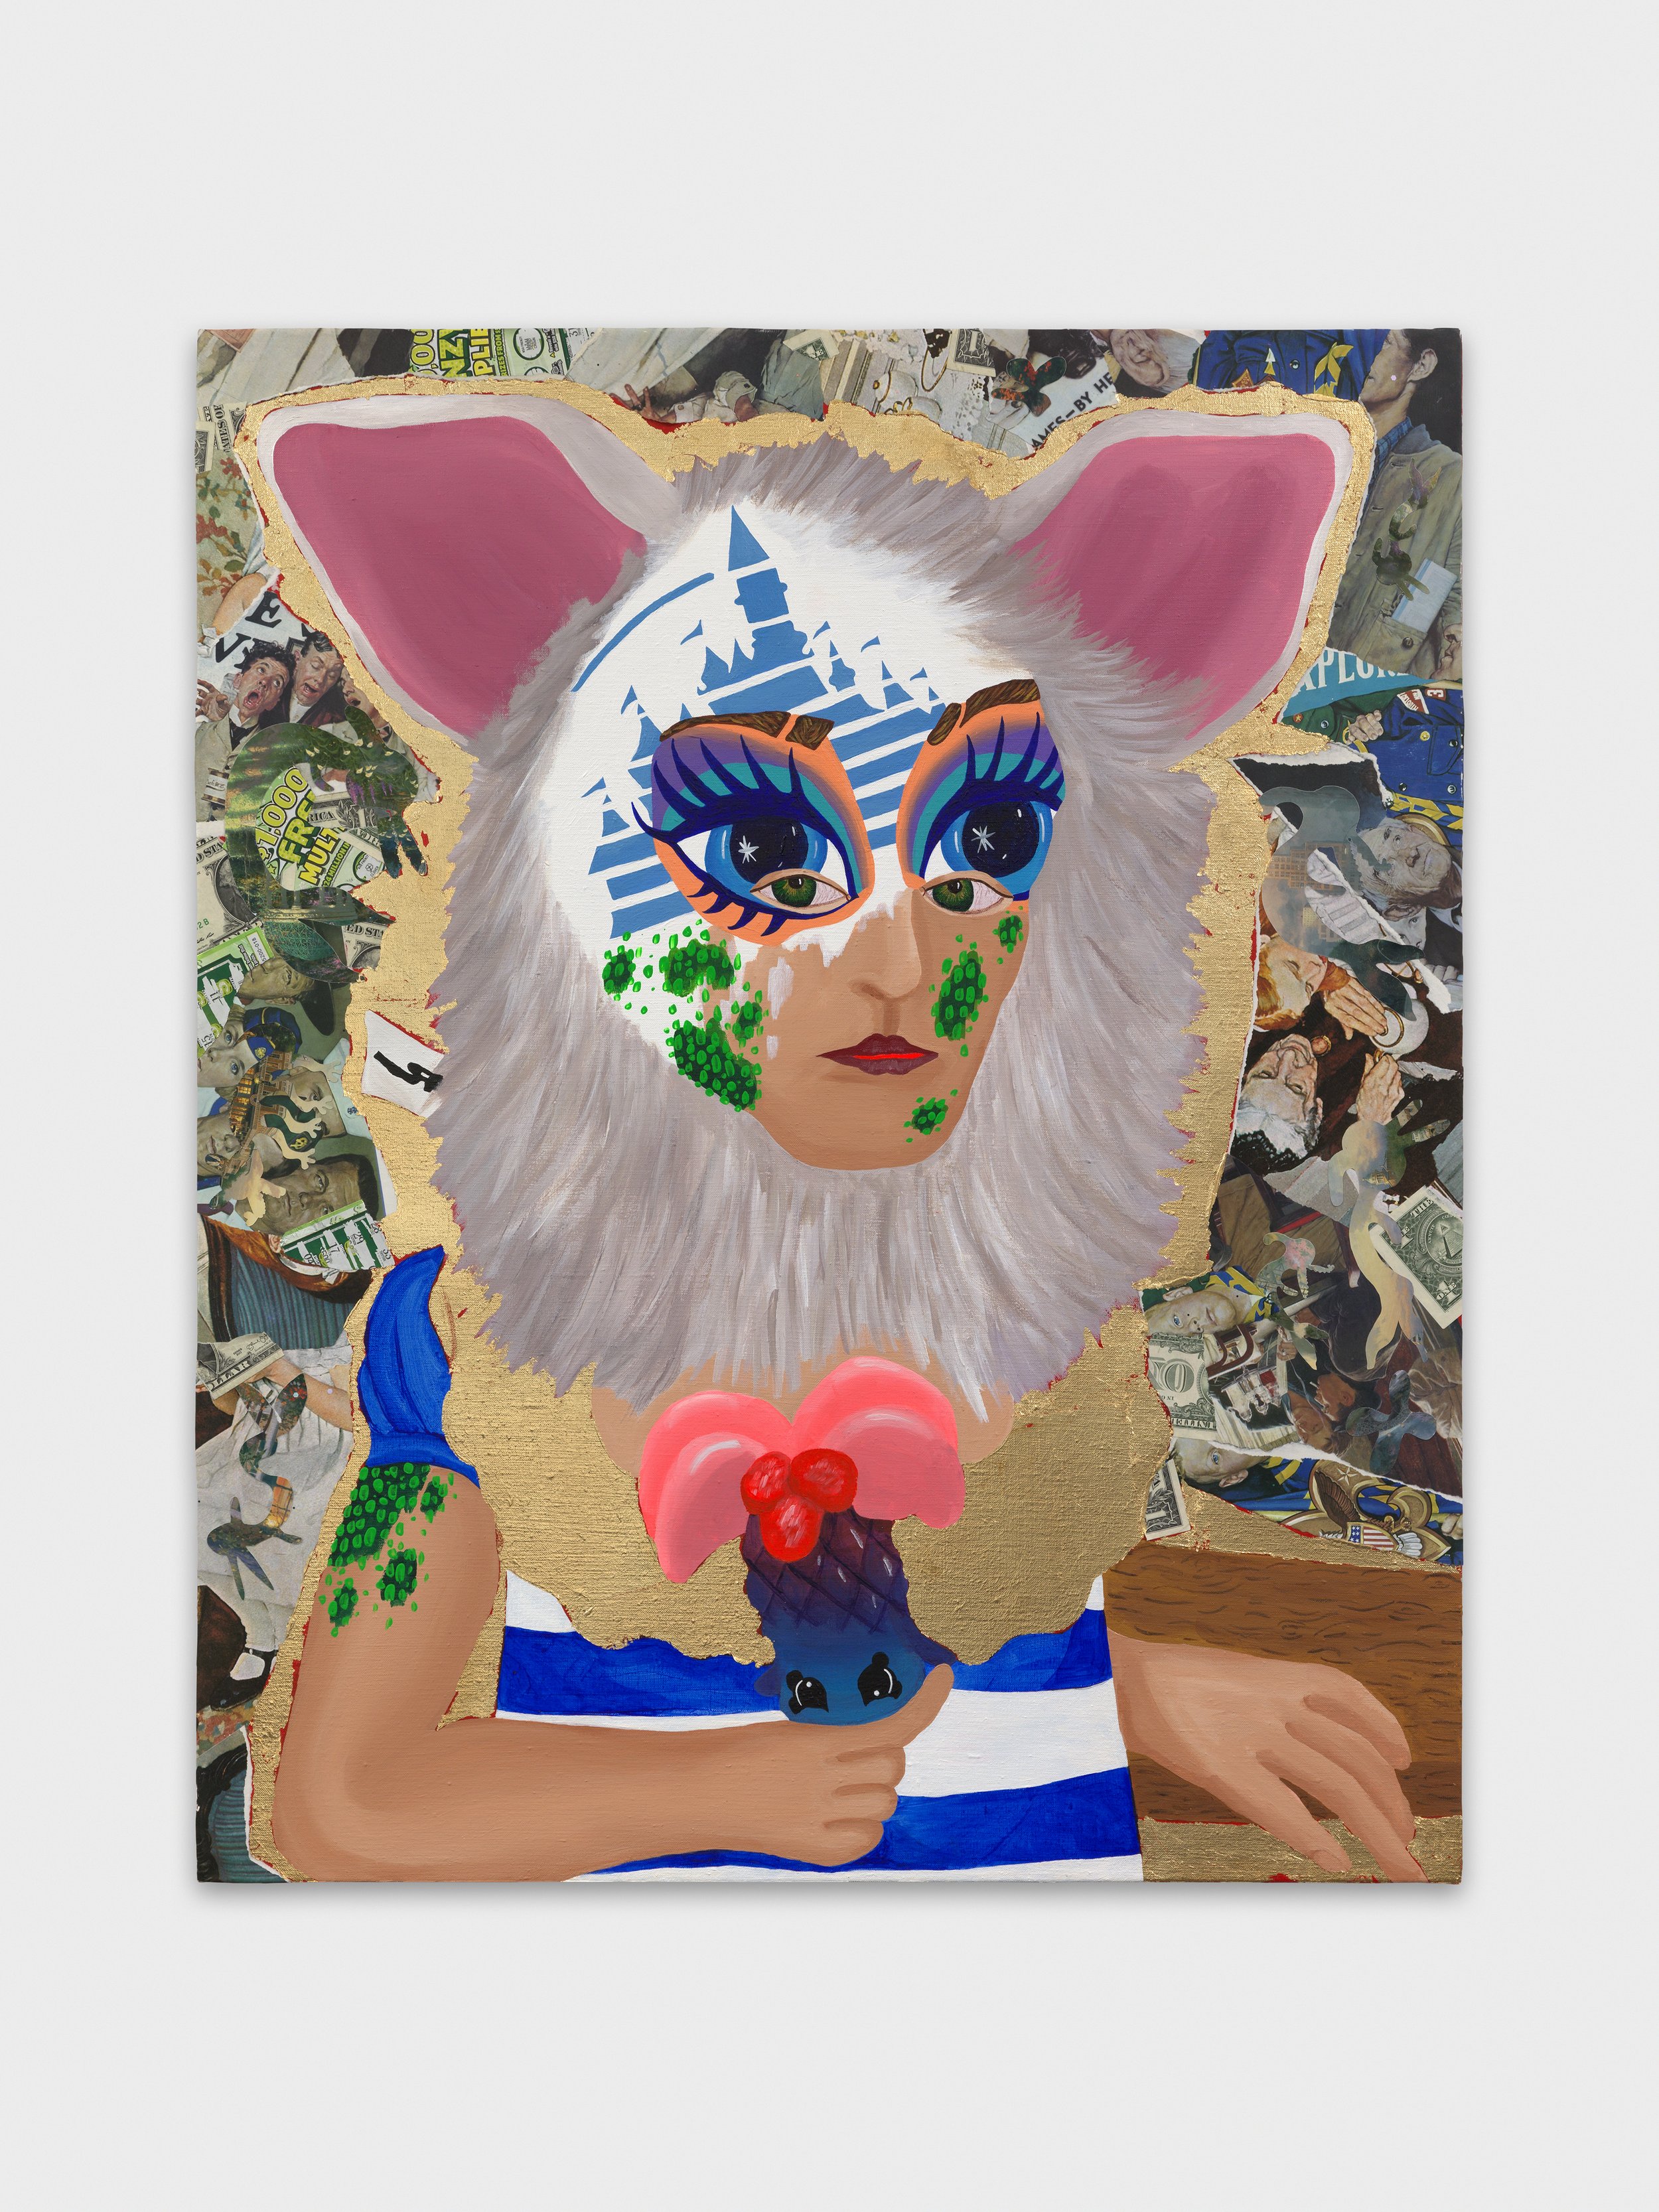   Furby/Girl with Disney Video Face Paint Holding a Shopkins Palm Tree with Little Saint James Themed Dress , 2021  33 x 27 x 1.5 inches (83.82 x 68.58 x 3.81 cm.)  Acrylic, gold leaf, dollar bills, lottery tickets and Norman Rockwell print, and Thom